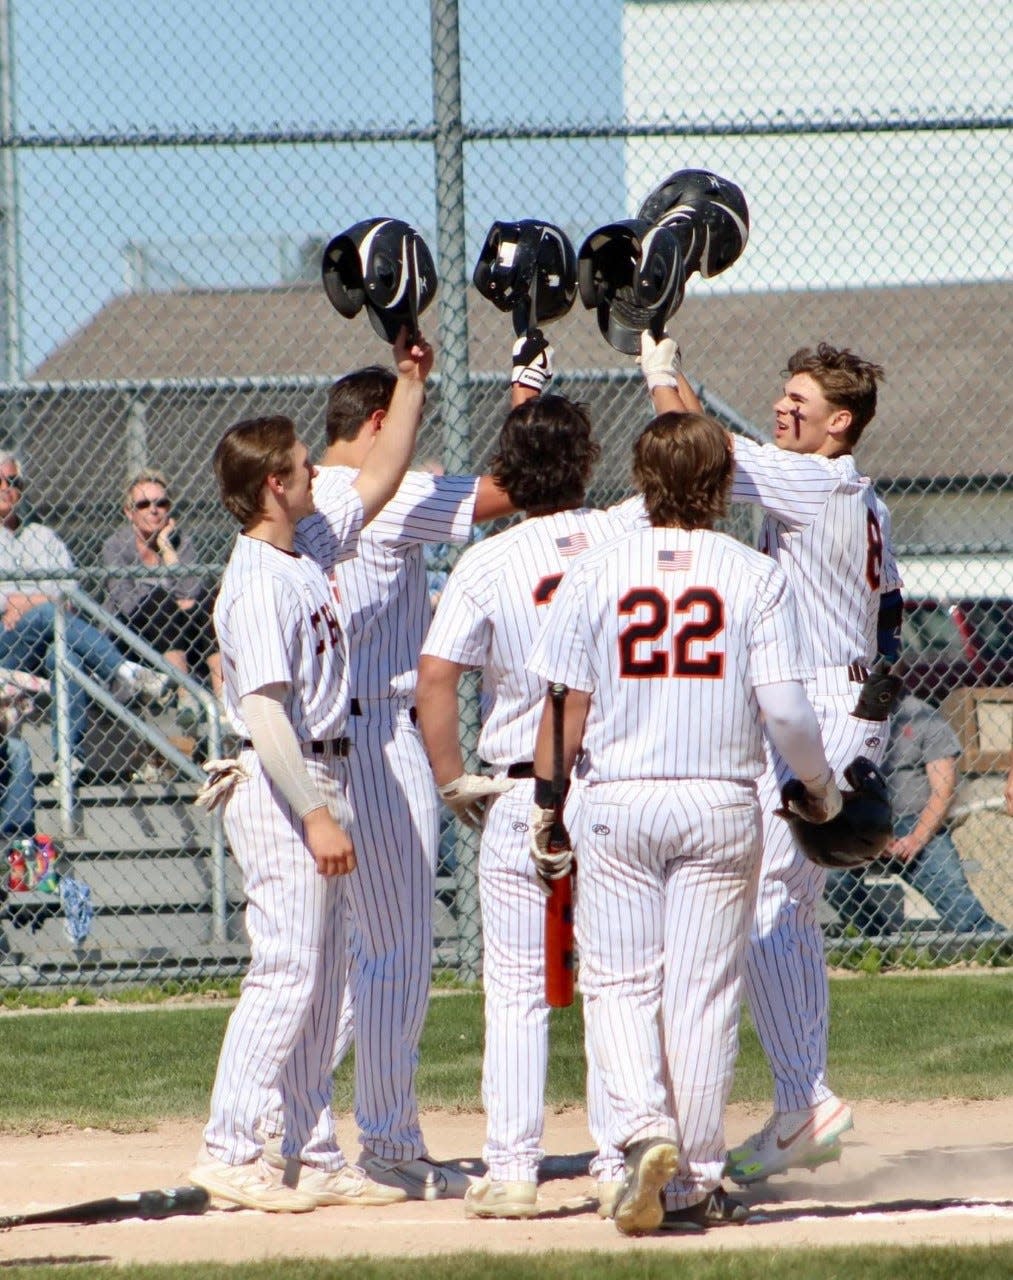 Cheboygan senior Daniel Wilcome (far right) celebrates with teammates after hitting a grand slam during game one of a baseball doubleheader against Inland Lakes on Monday.